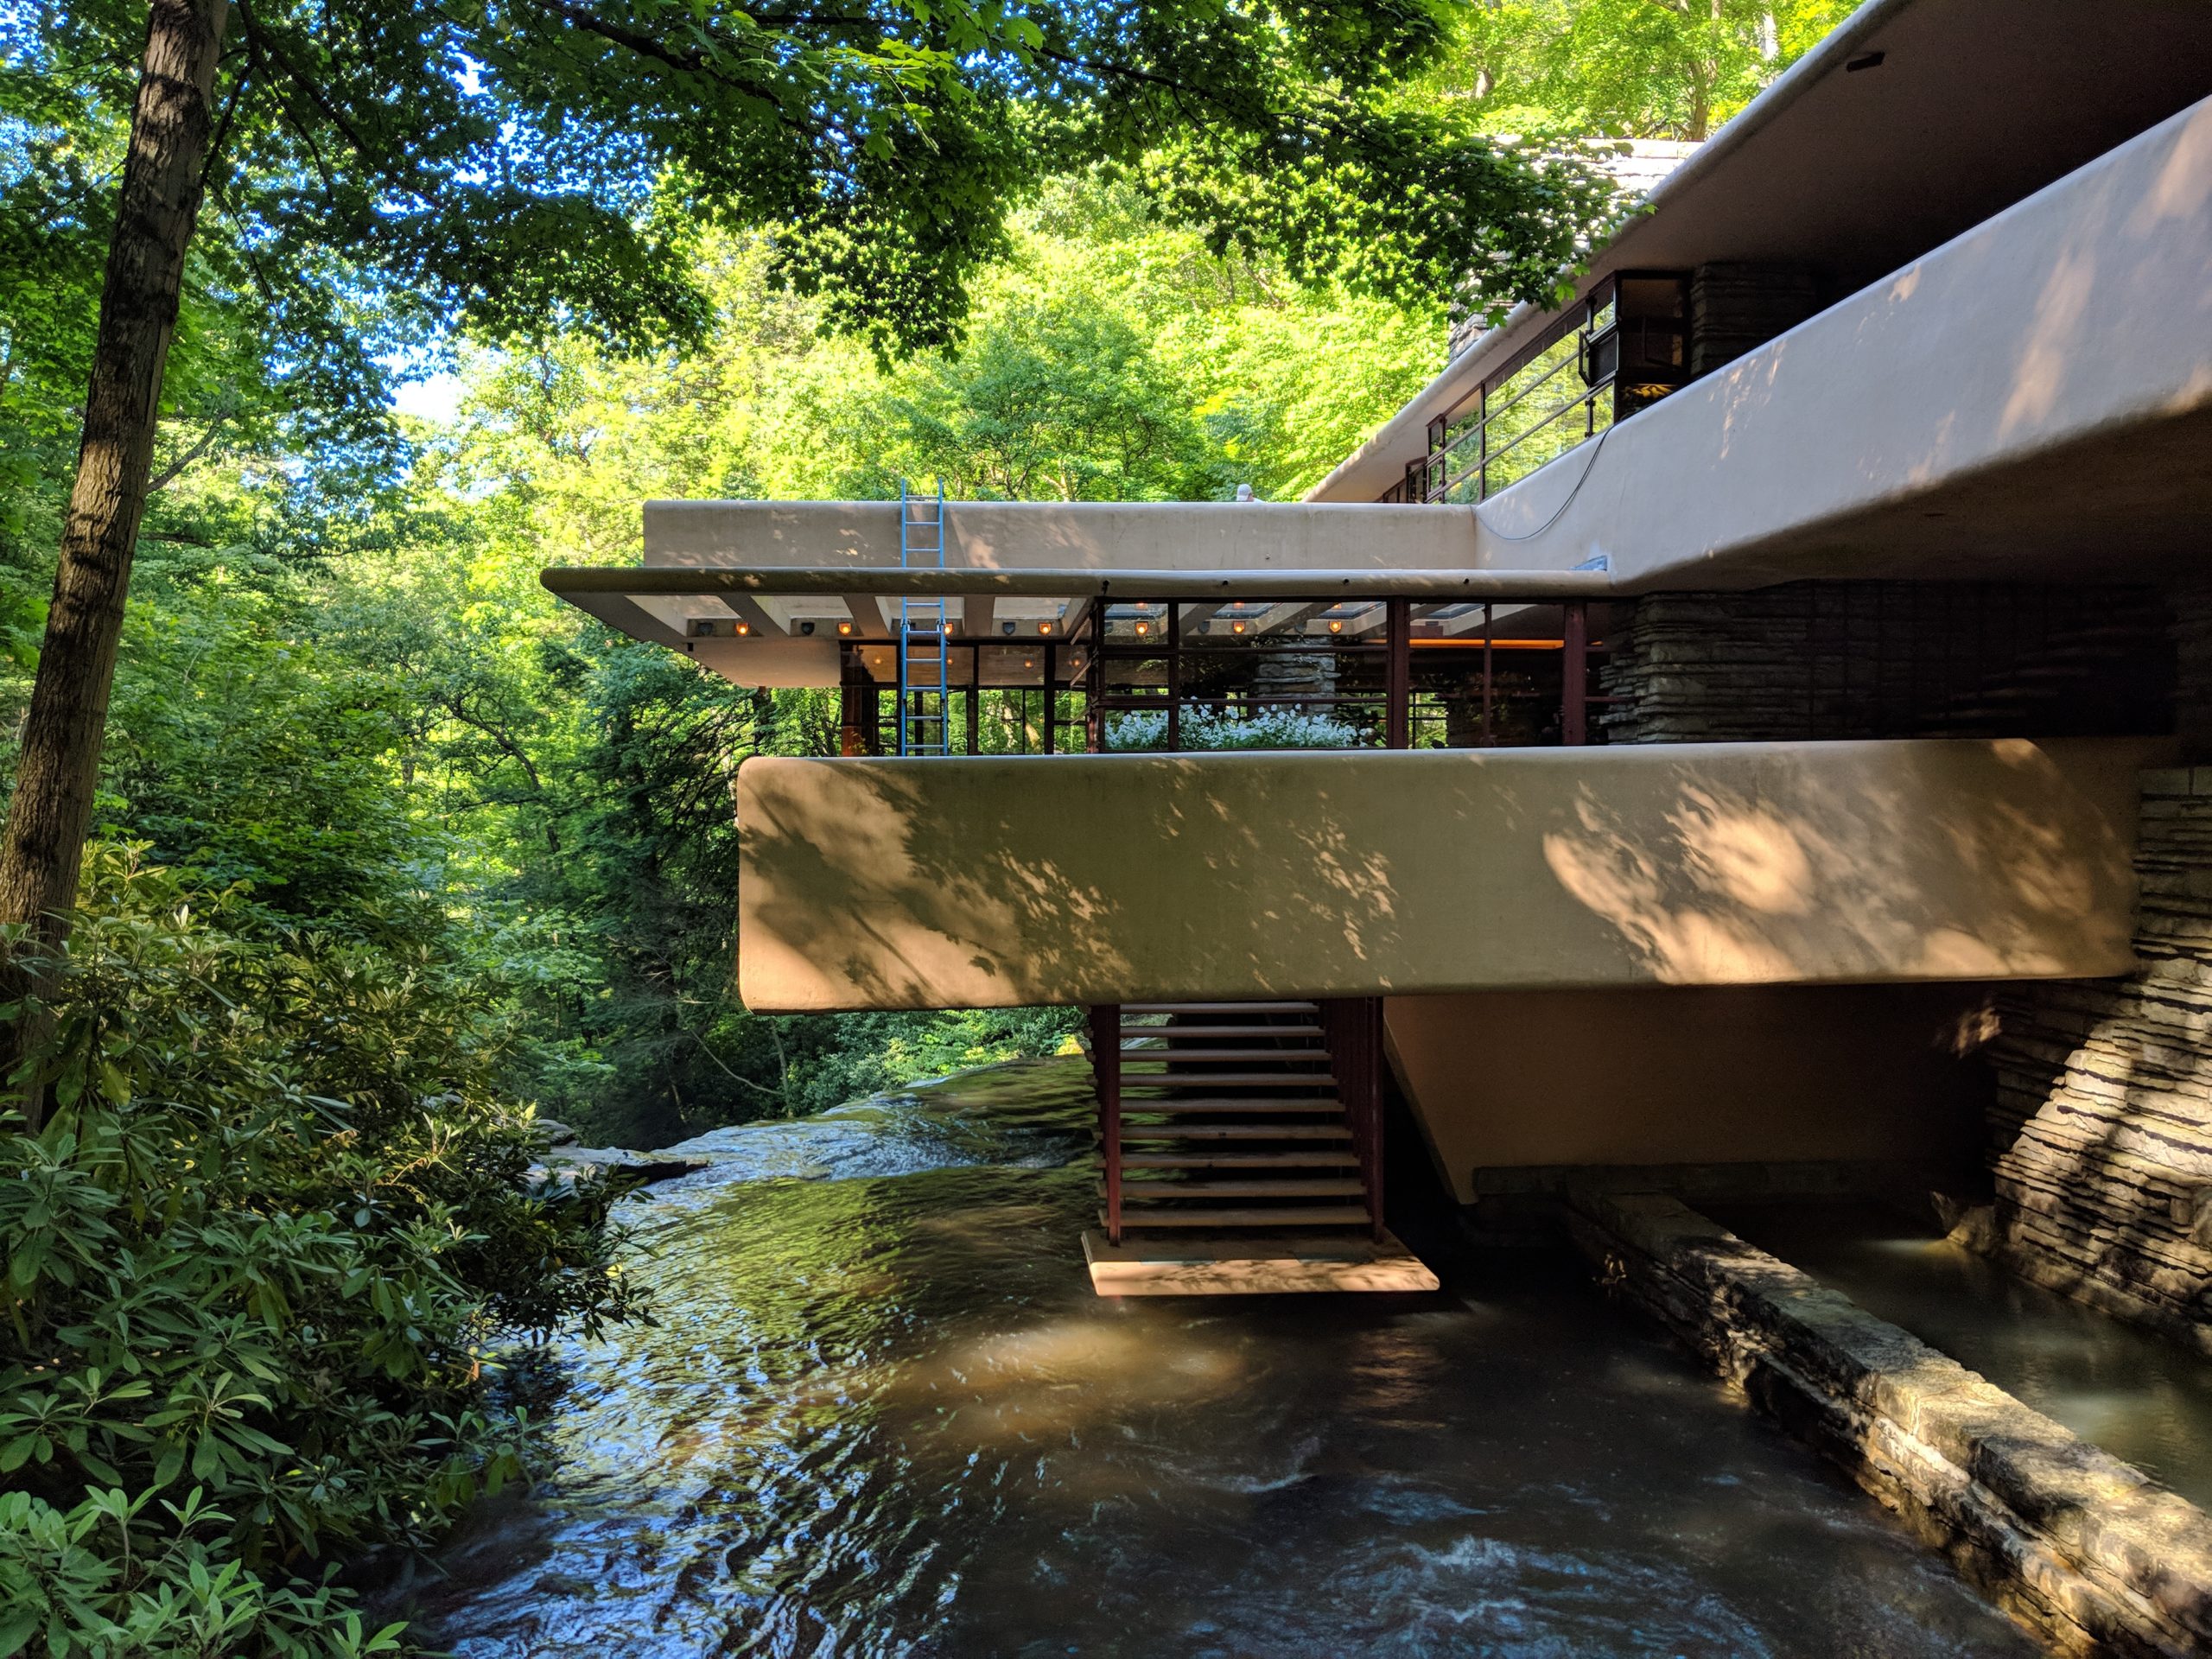 From Frank Lloyd Wright to Frank Gehry Makers of Modern Architecture